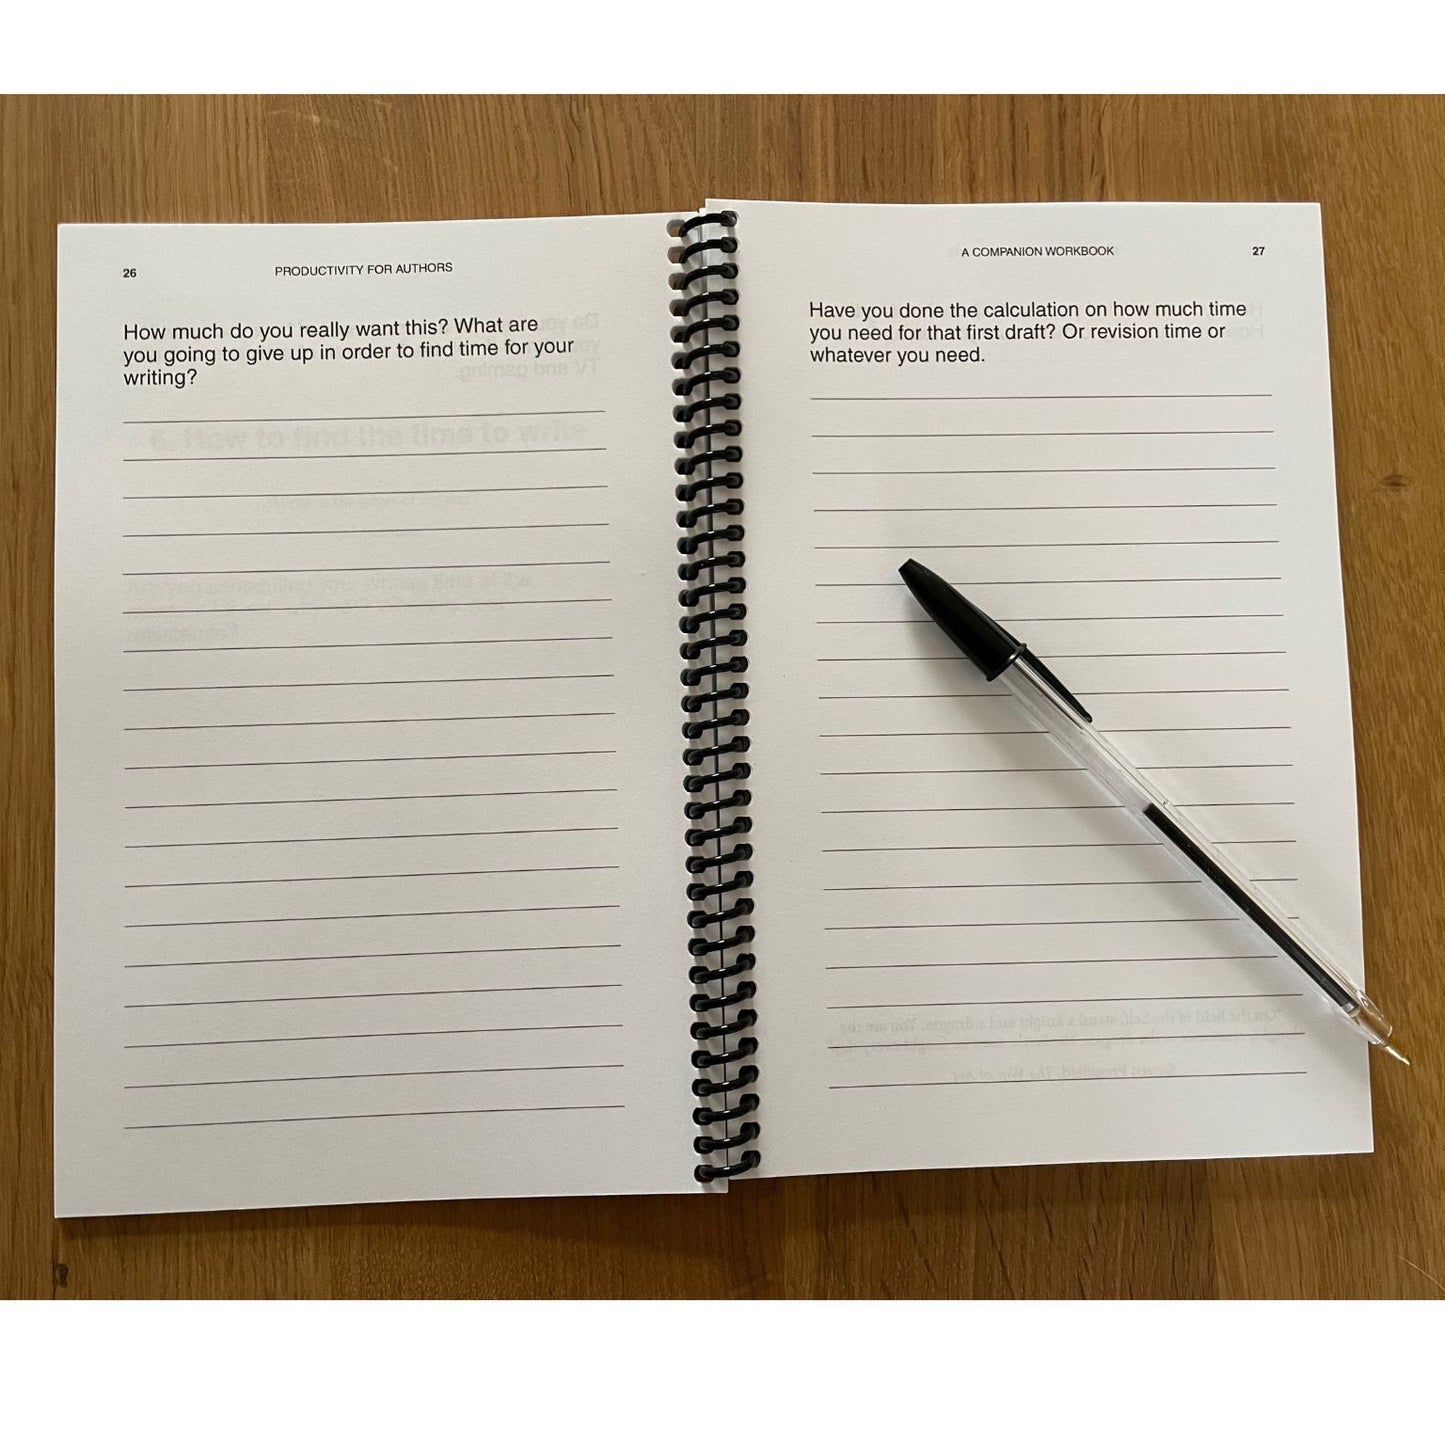 Productivity for Authors Spiral Bound Workbook